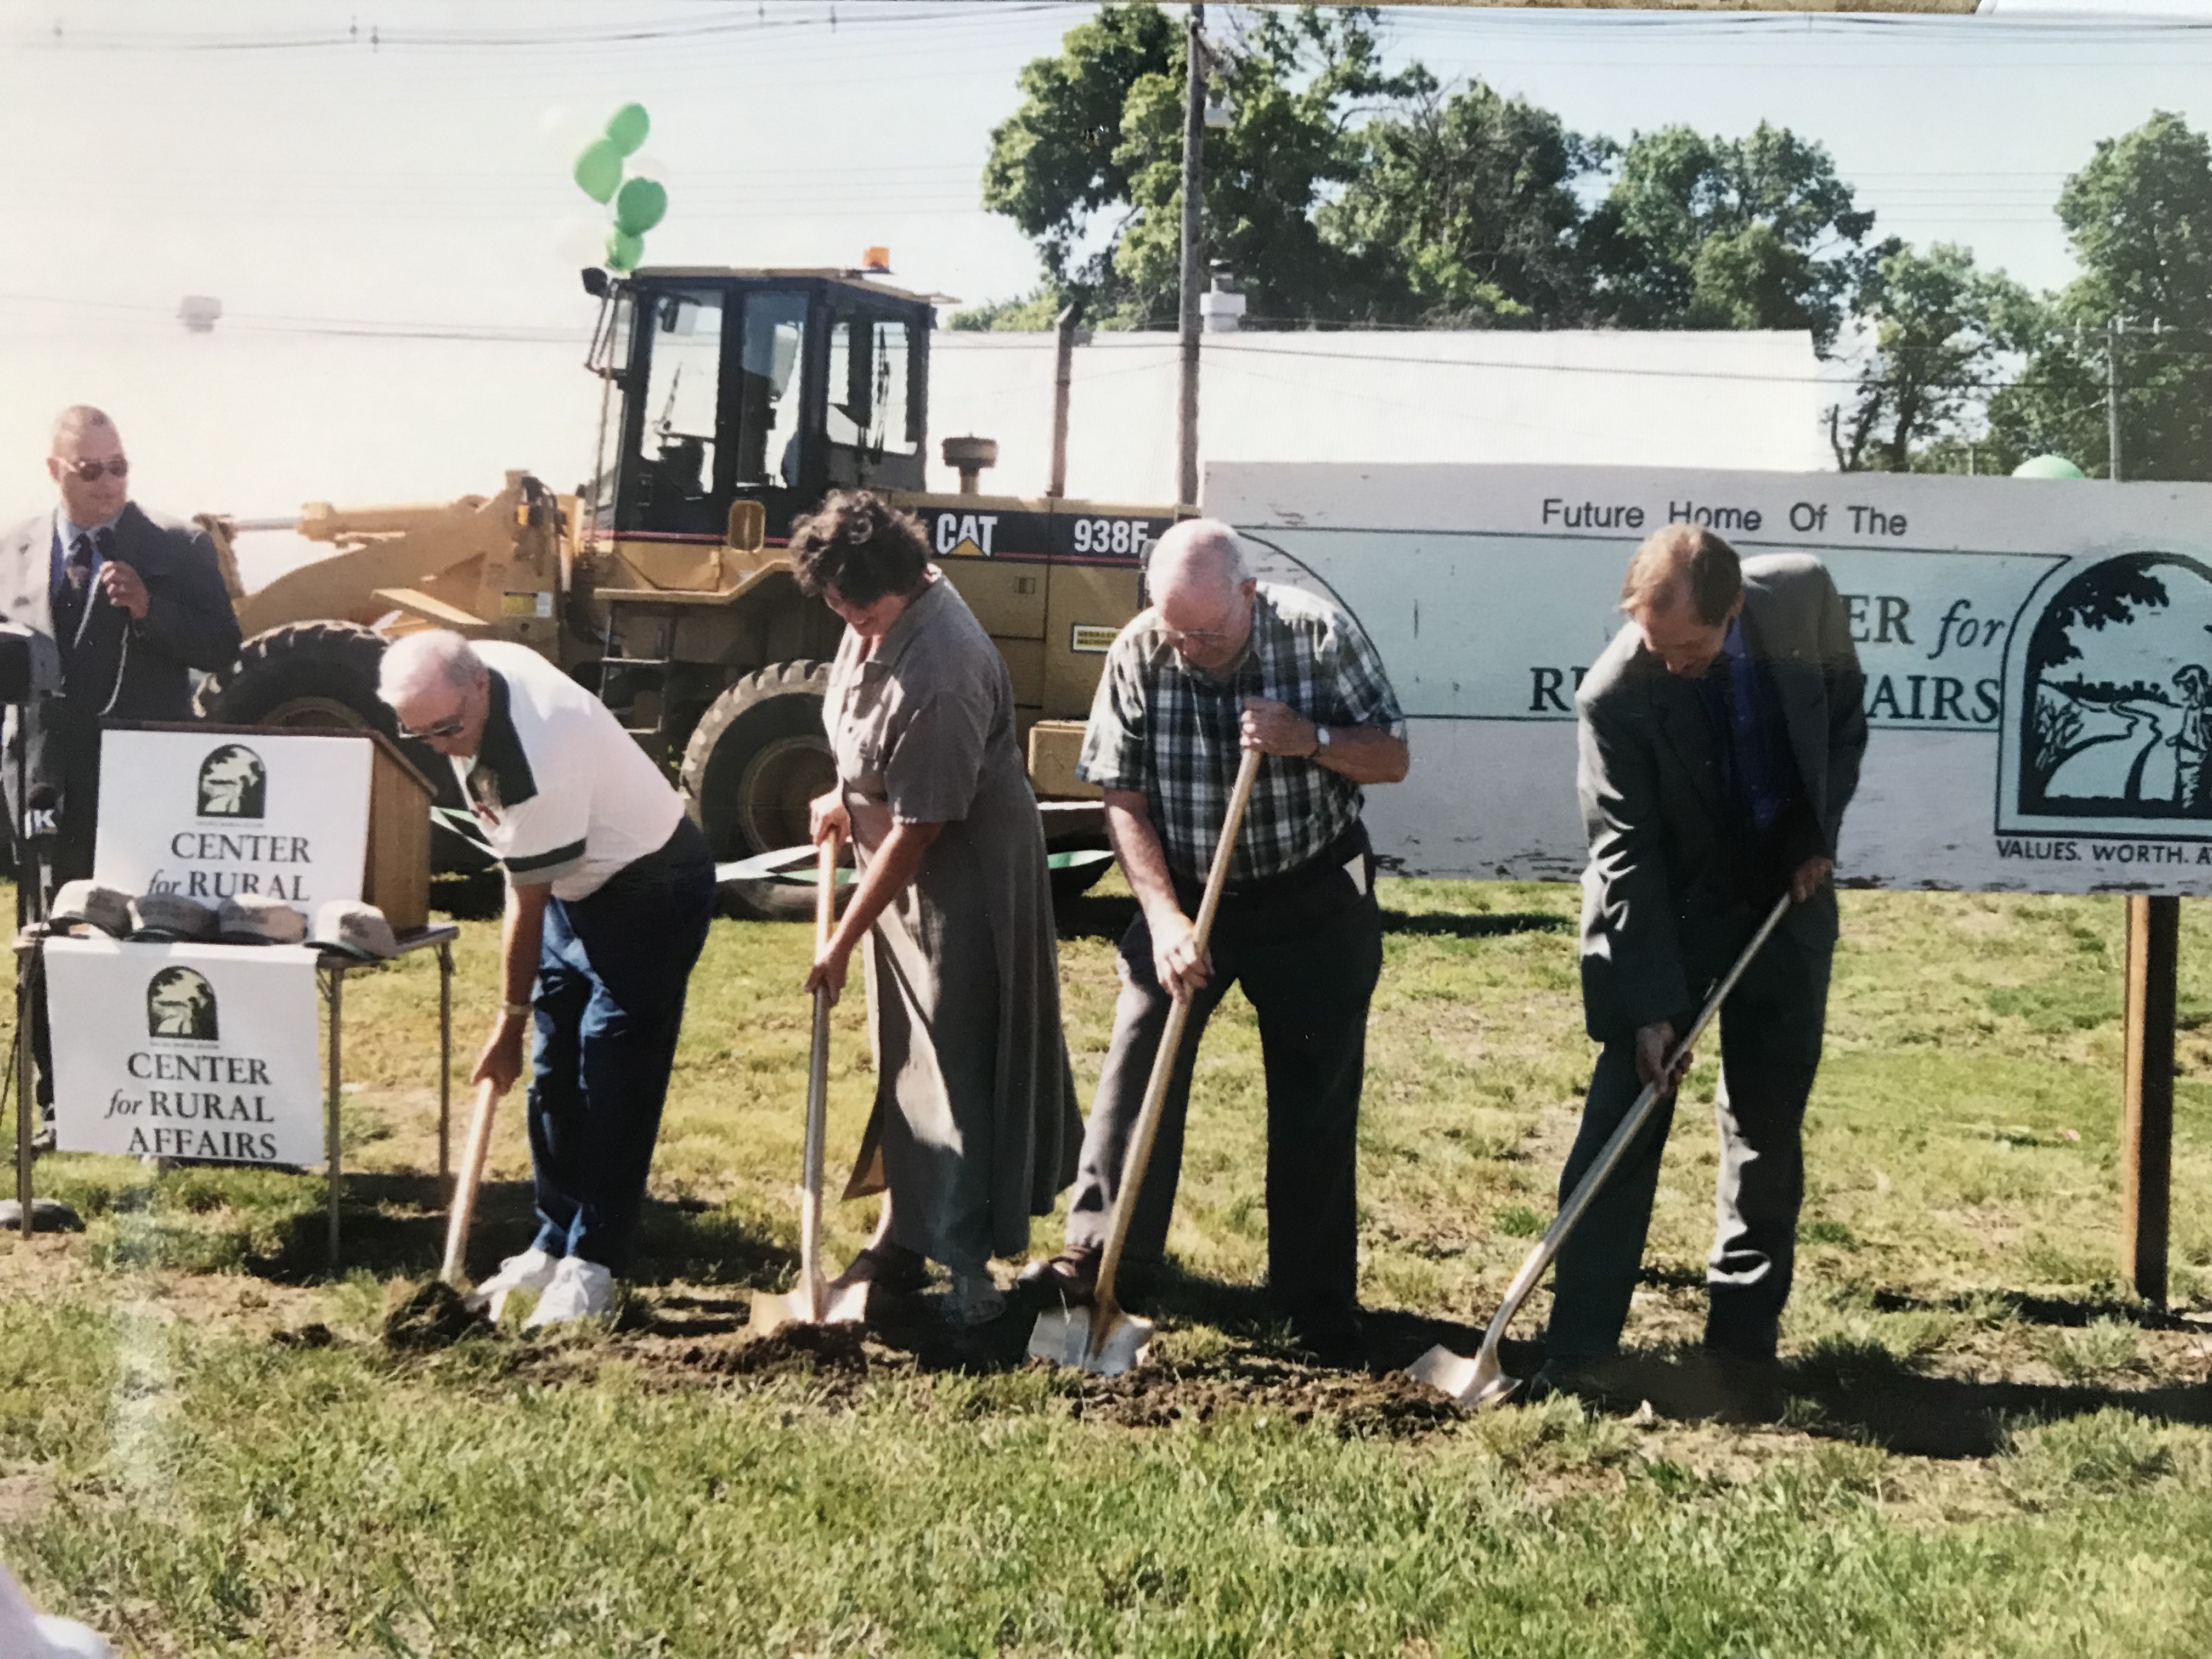 Four individuals shoveling dirt at a groundbreaking